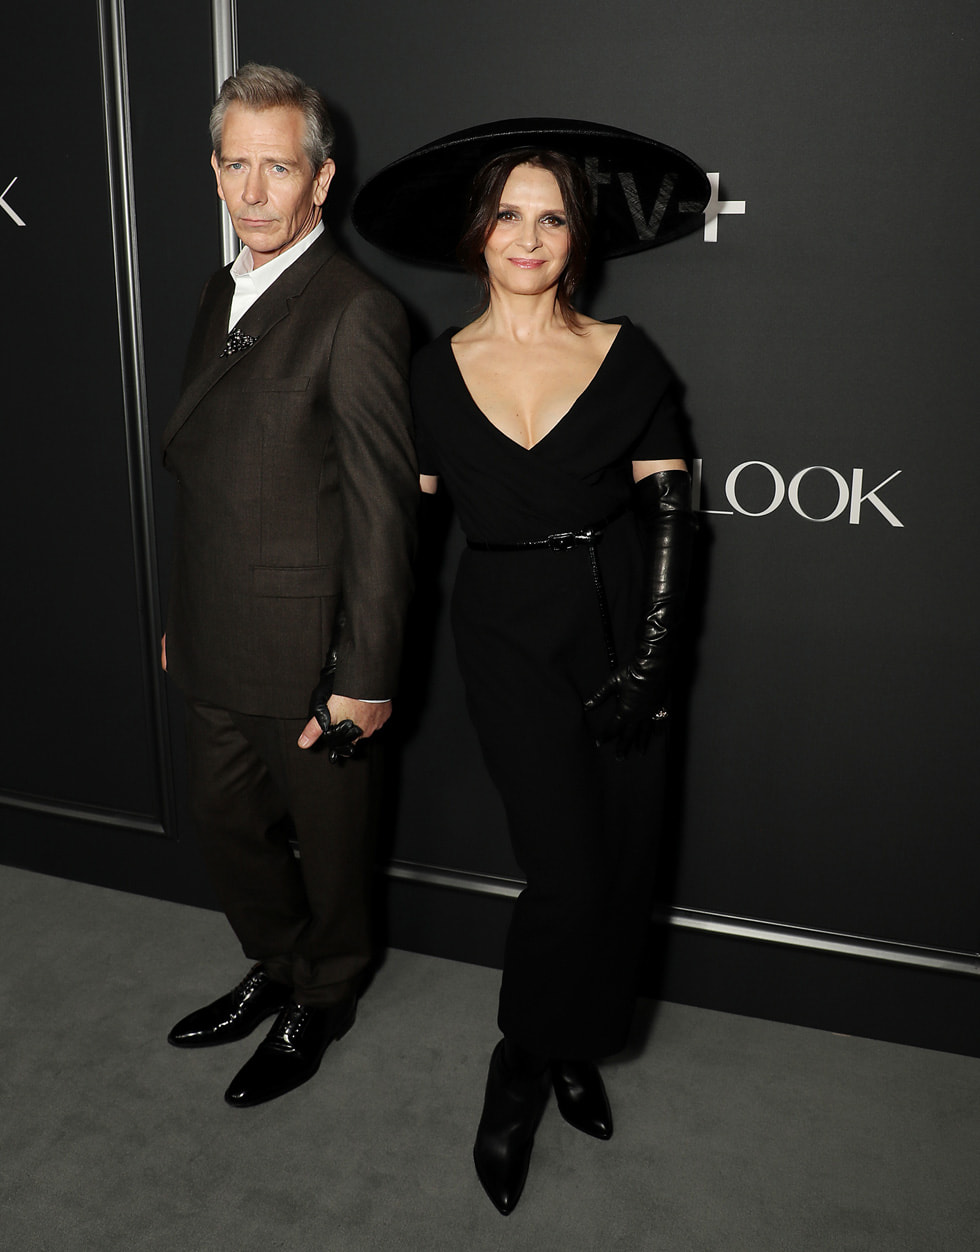 Ben Mendelsohn and Juliette Binoche attend the premiere of the Apple TV+ thrilling series “The New Look” at Florence Gould Hall. “The New Look” will make its global debut on Apple TV+ on Wednesday, February 14, 2024.